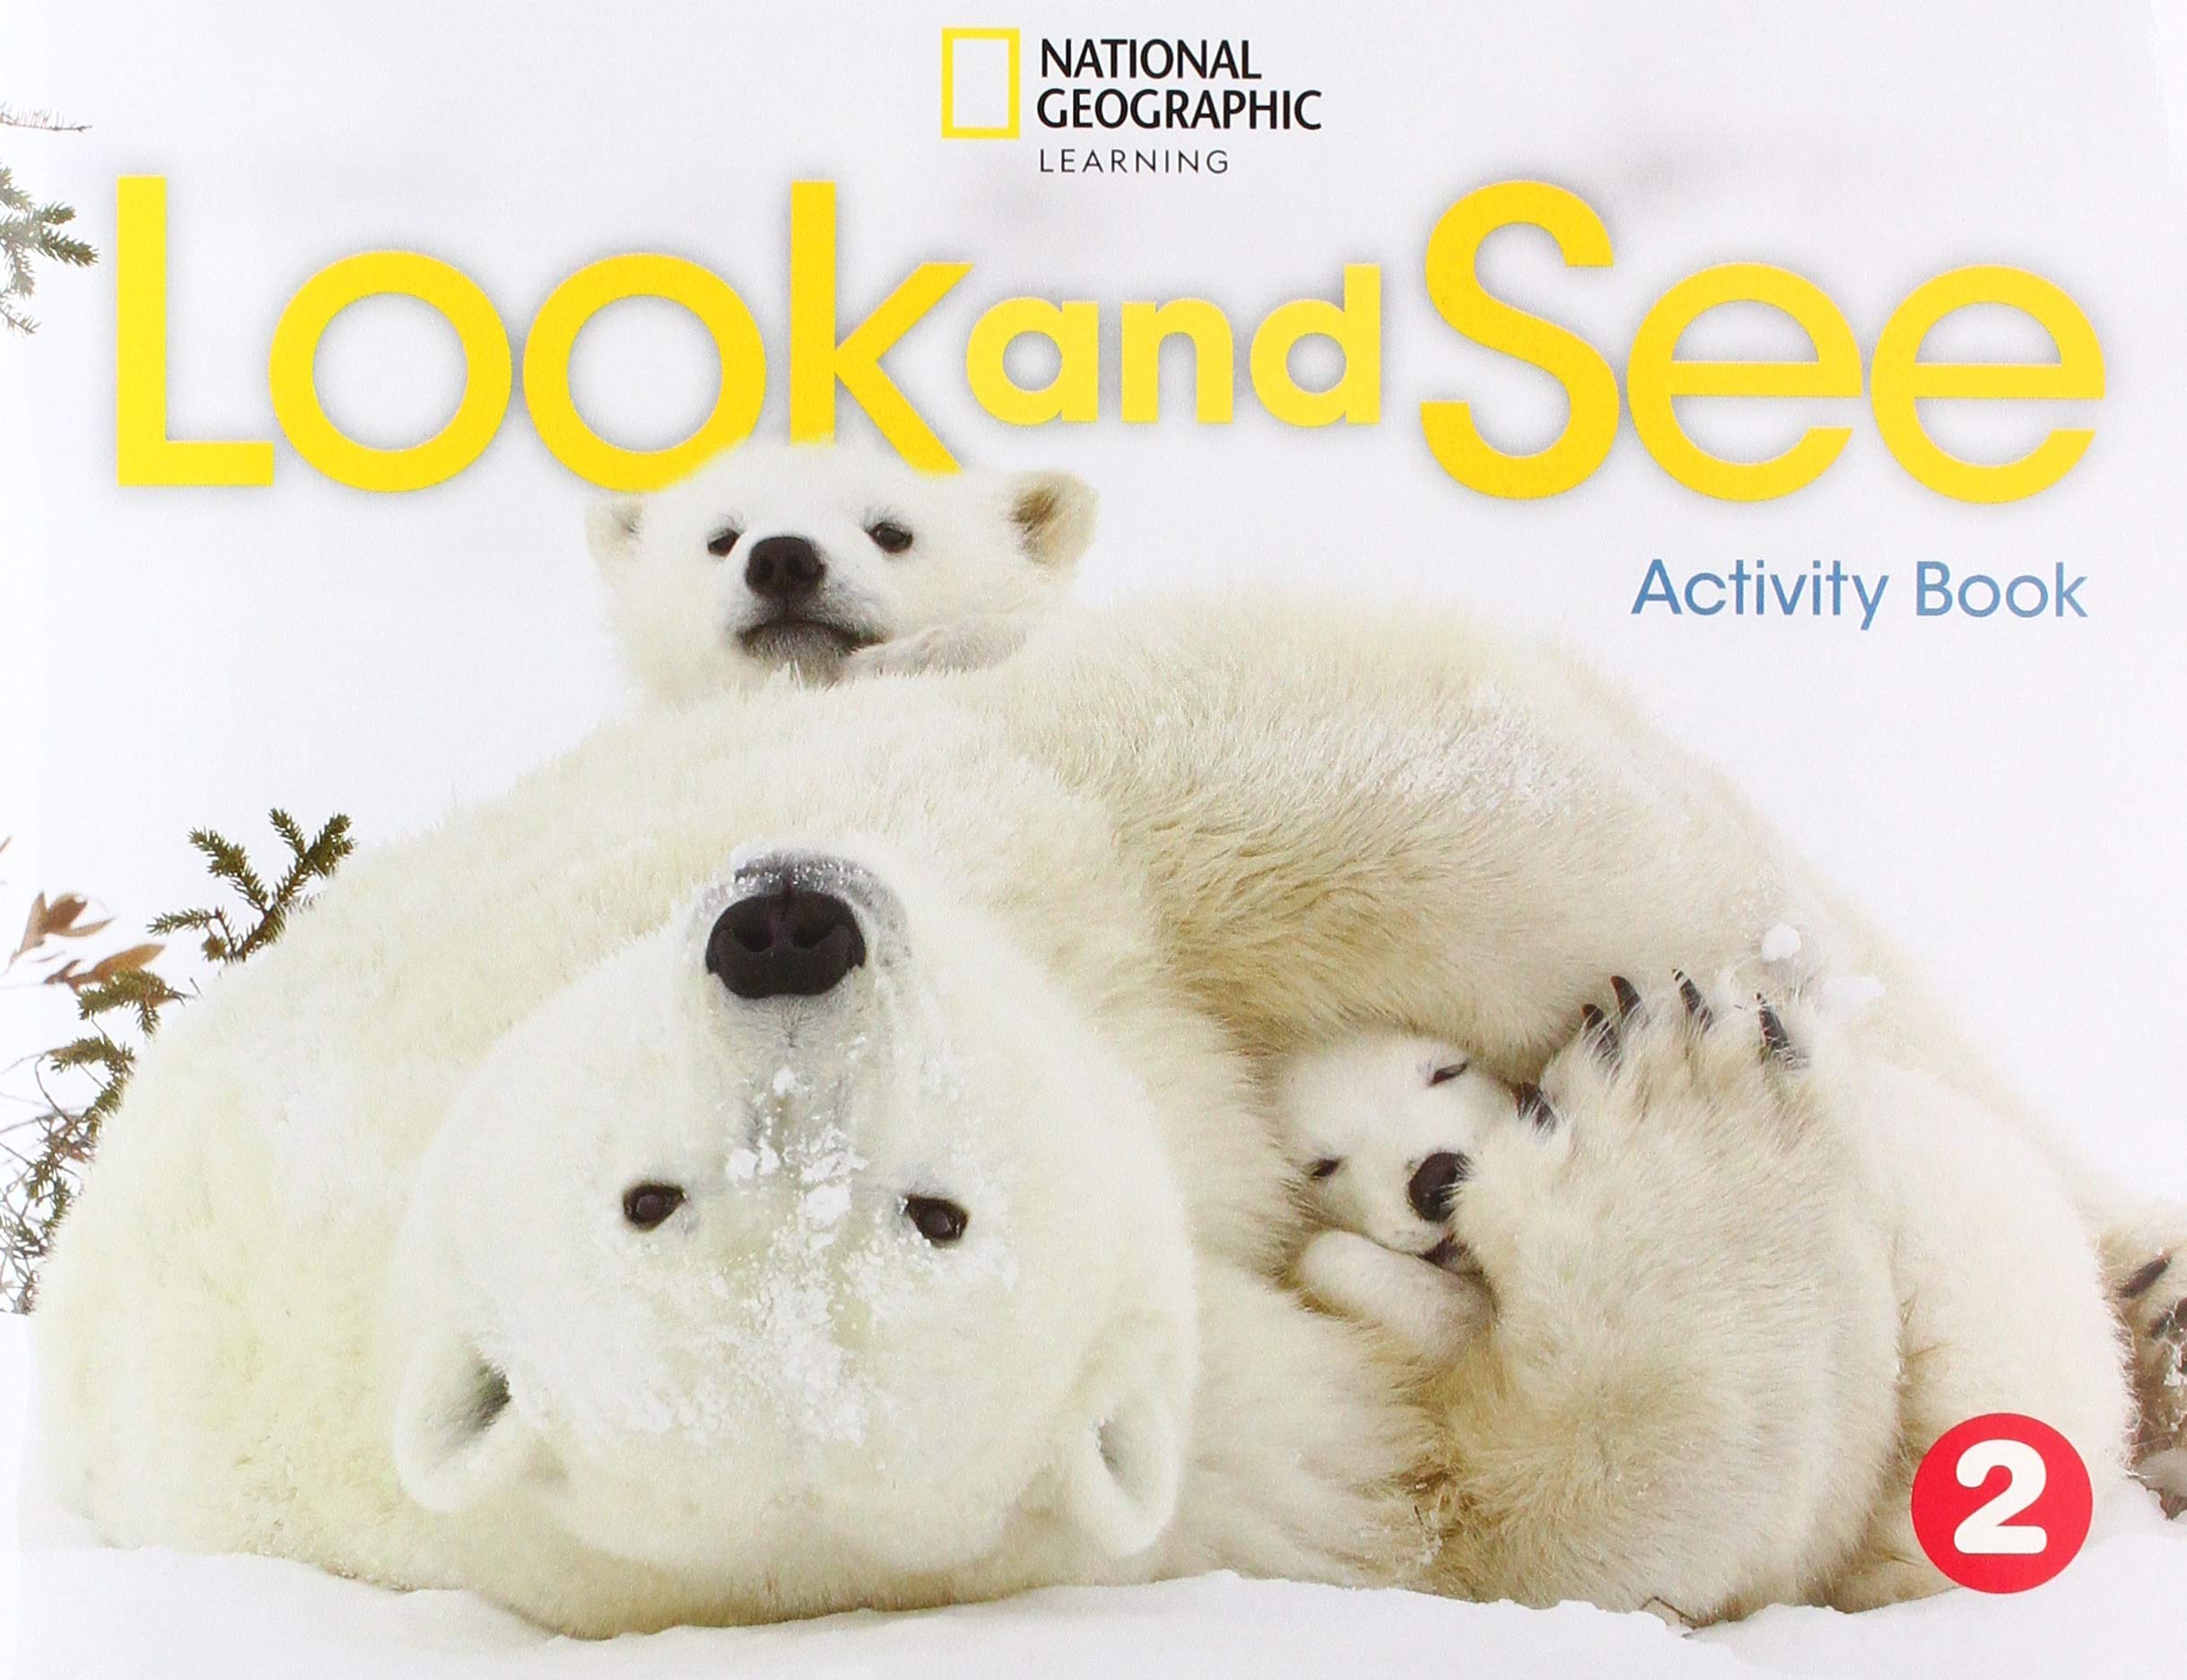 Look and See 2 - Activity Book(Ασκήσεων Μαθητή)(British Edition) - National Geographic Learning(Cengage)